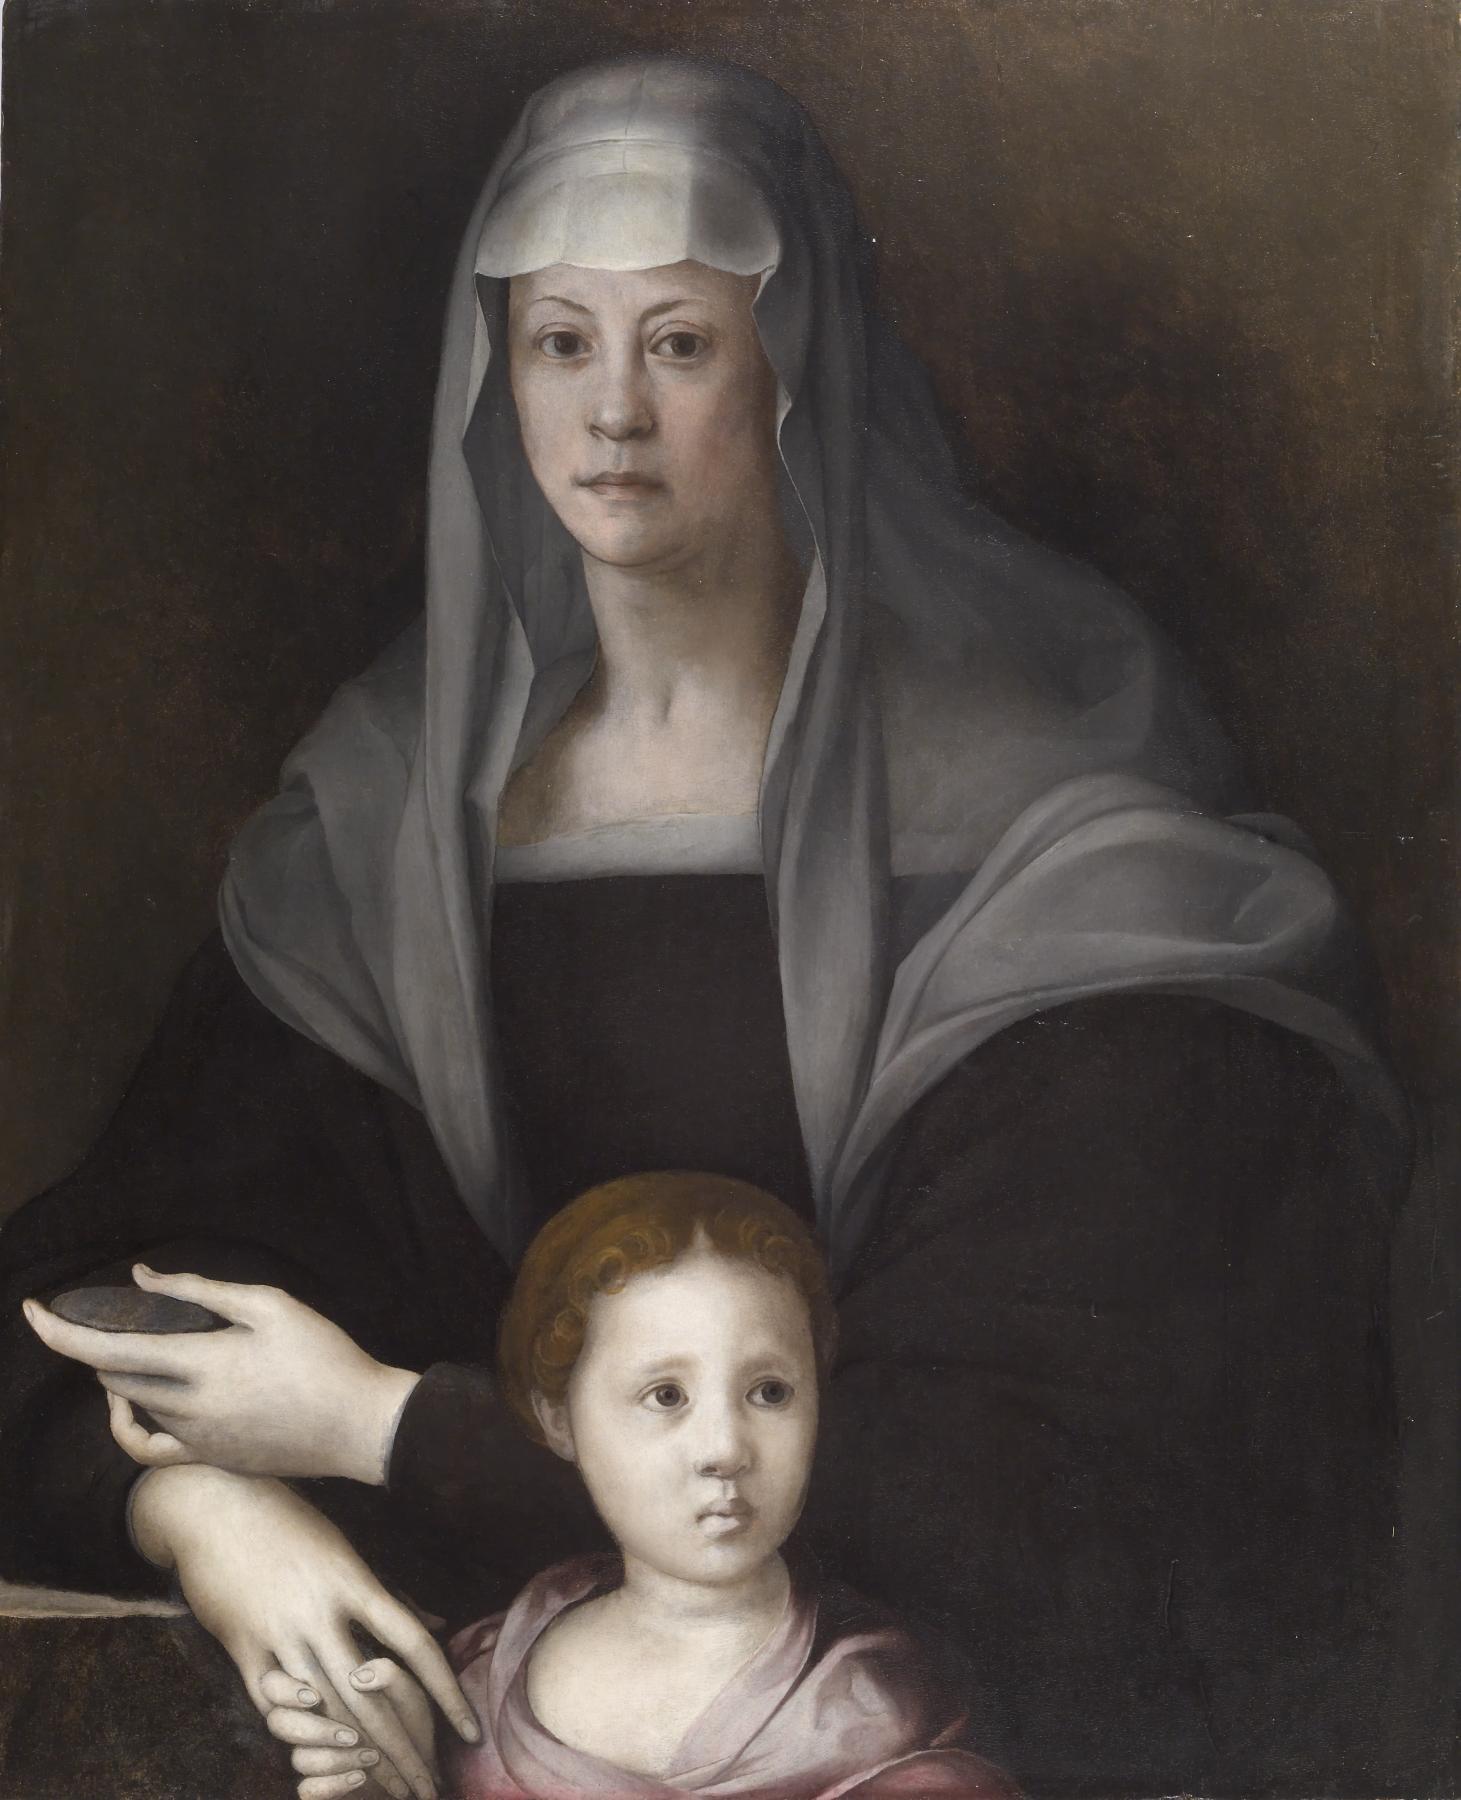 a women dressed in somber colors holding the hand of a small girl, wearing clothing from 16th century